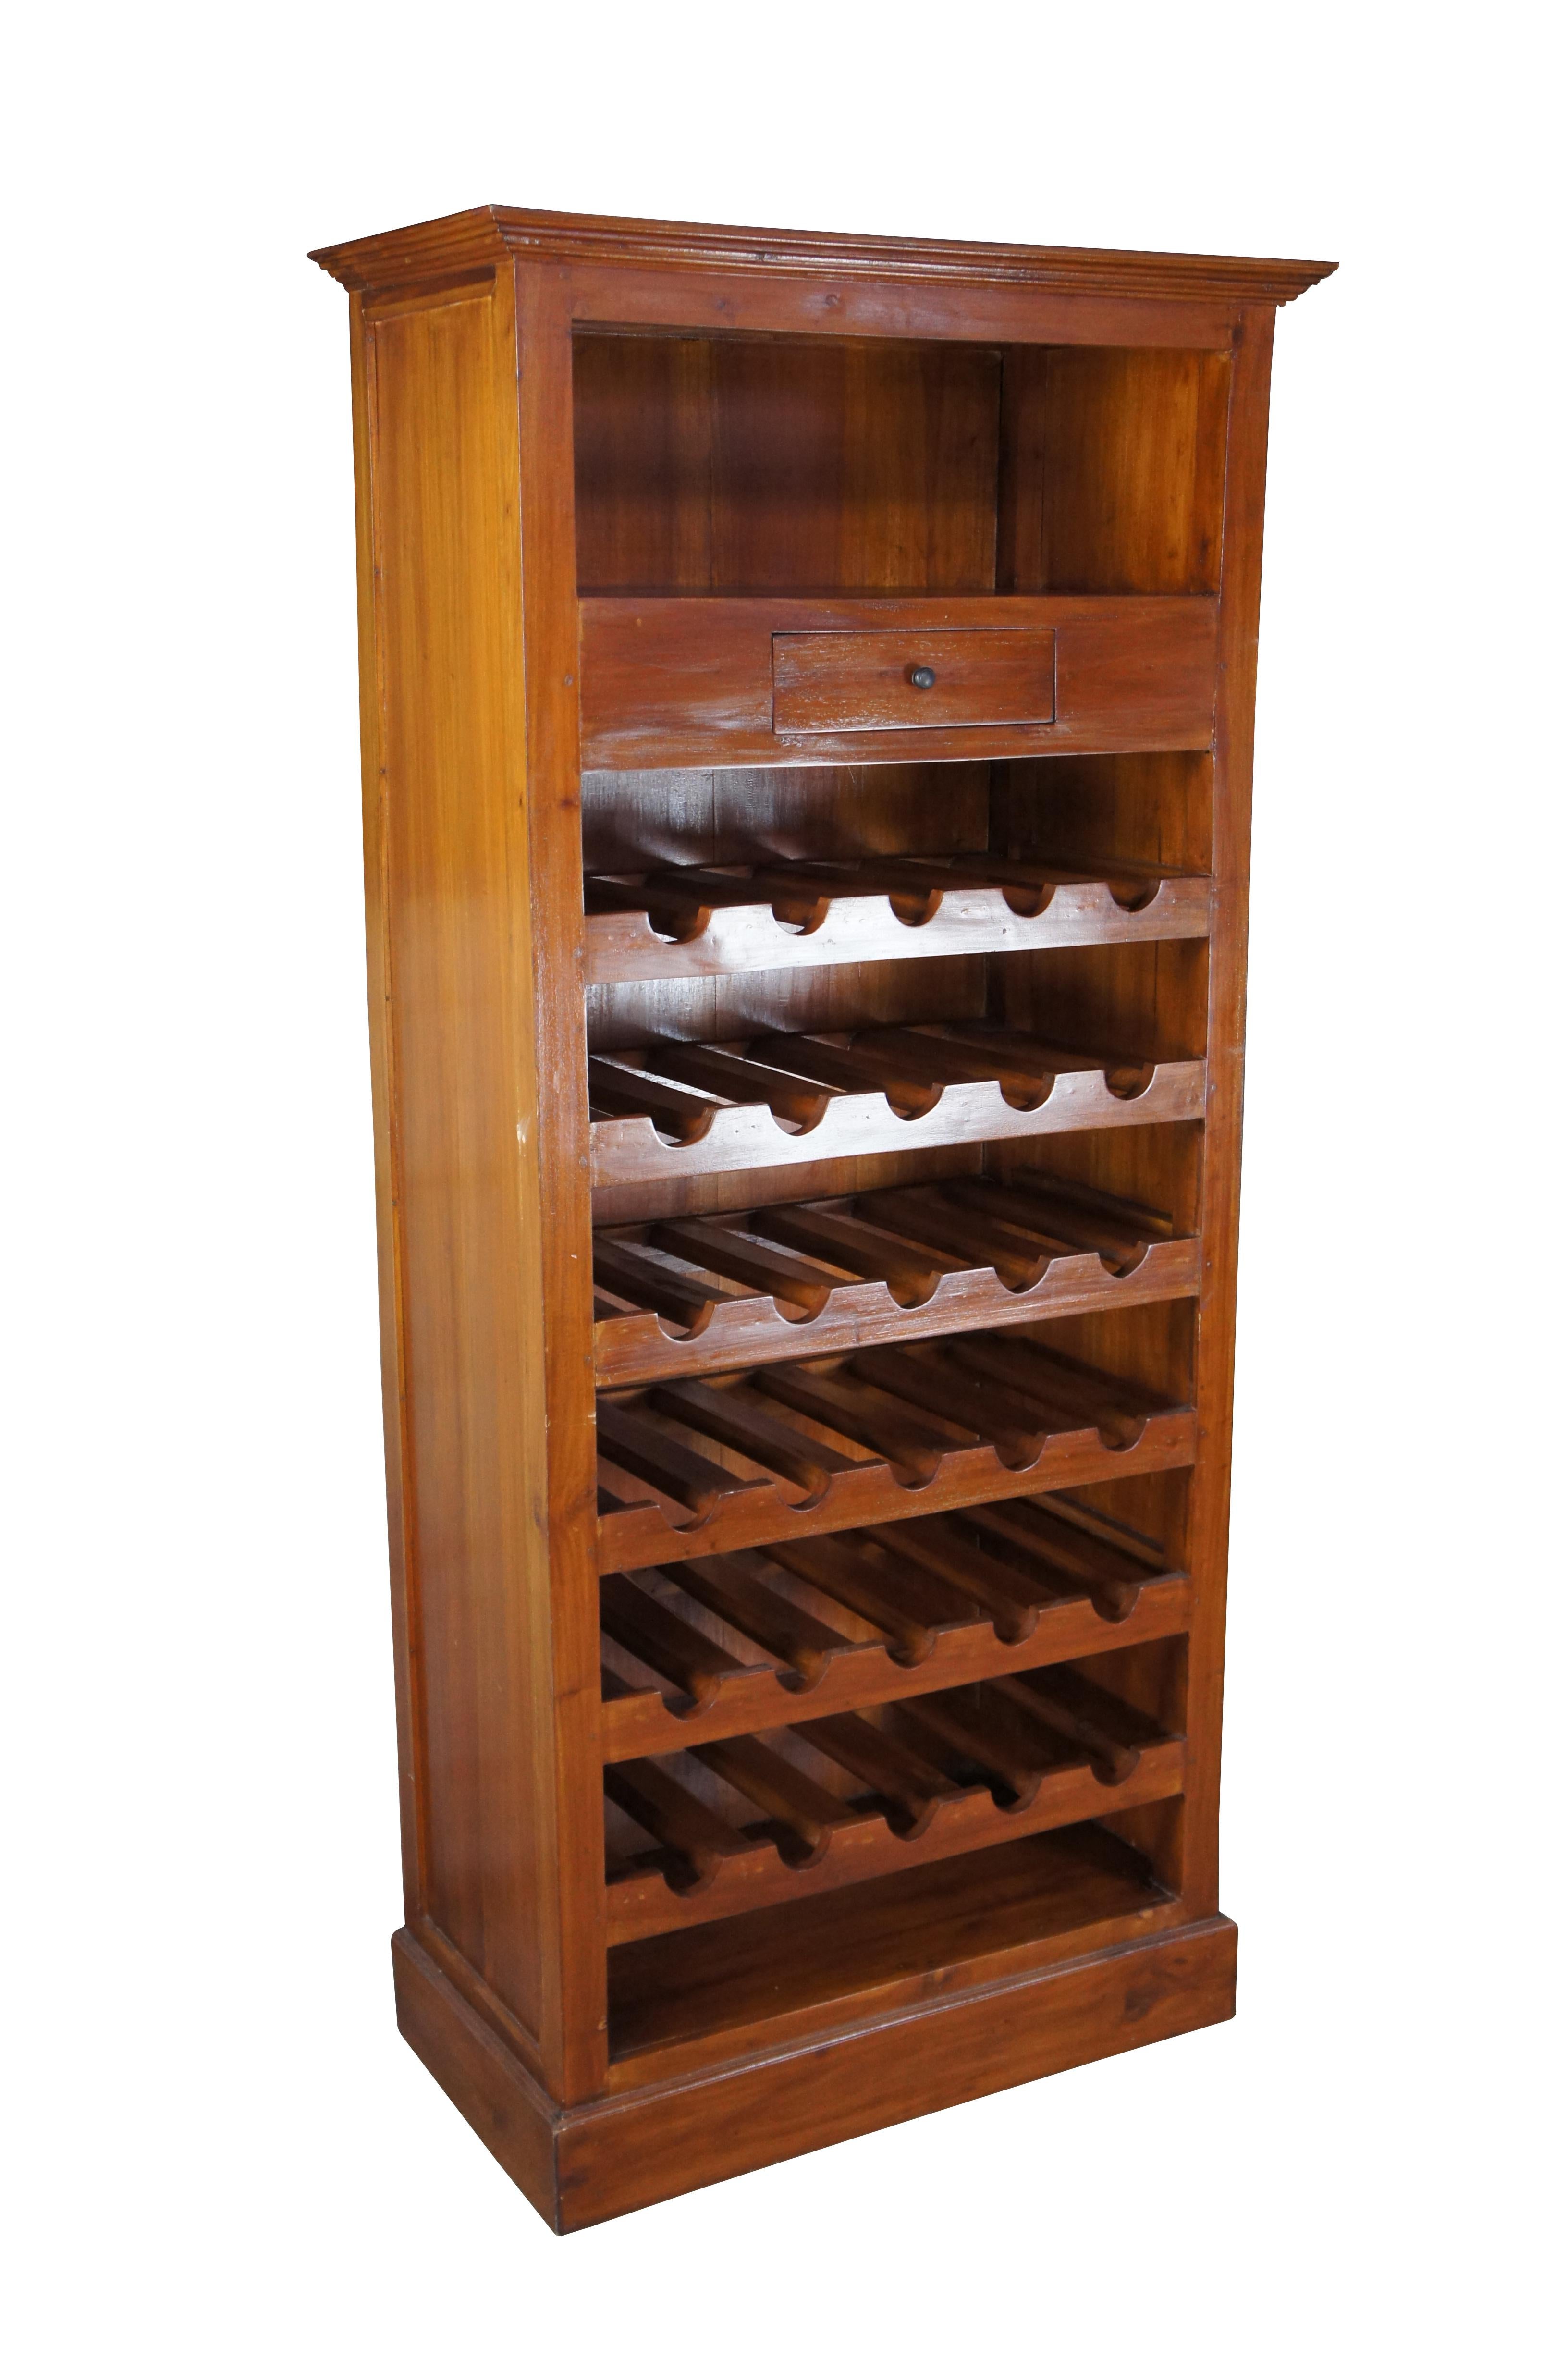 Tall case wine rack / bottle holder, circa 1990s. Made from mahogany with central gallery for wine display, an upper drawer and two shelves.

Dimensions:
17.5